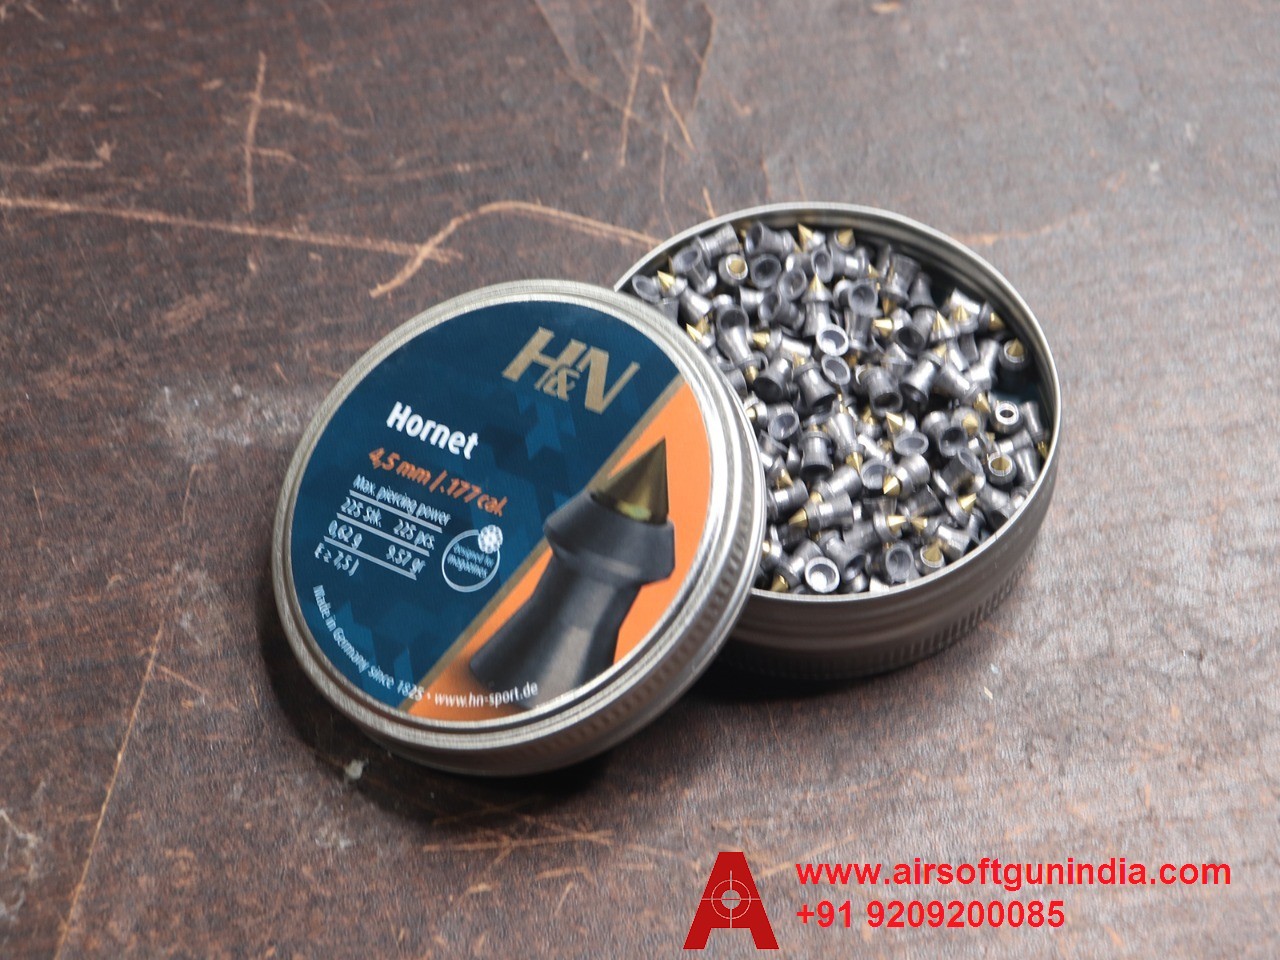 H&N Hornet Pointed Pellets For Rifles By Airsoft Gun India Of 225 Pcs